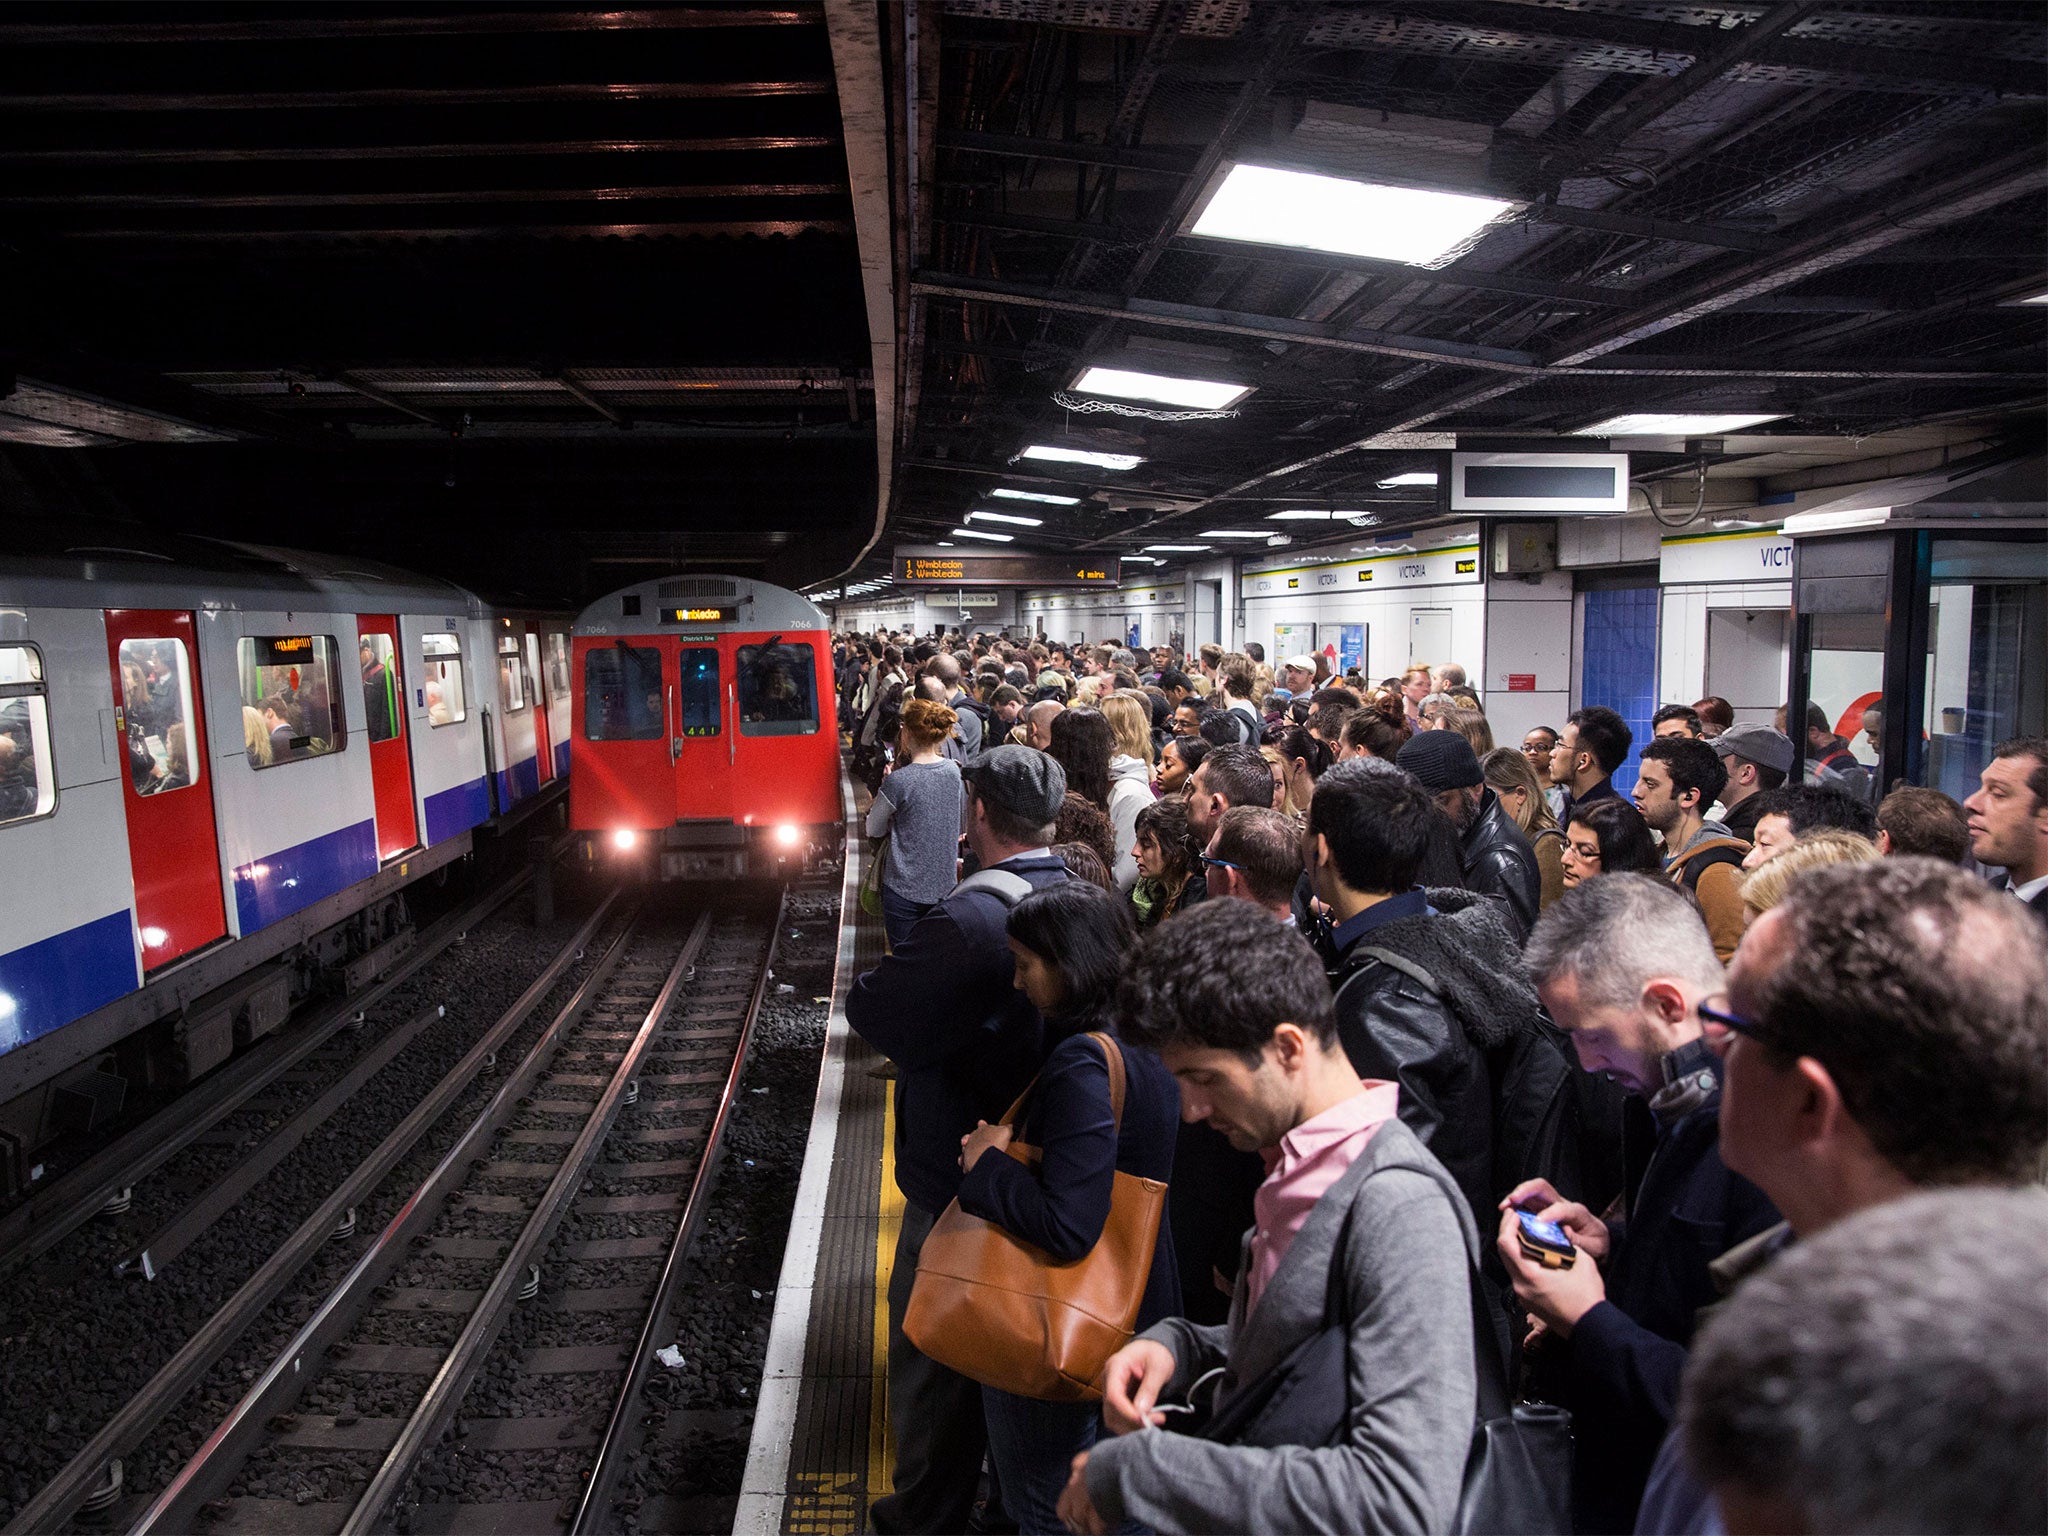 Union leaders have expressed concern about over-crowding on platforms